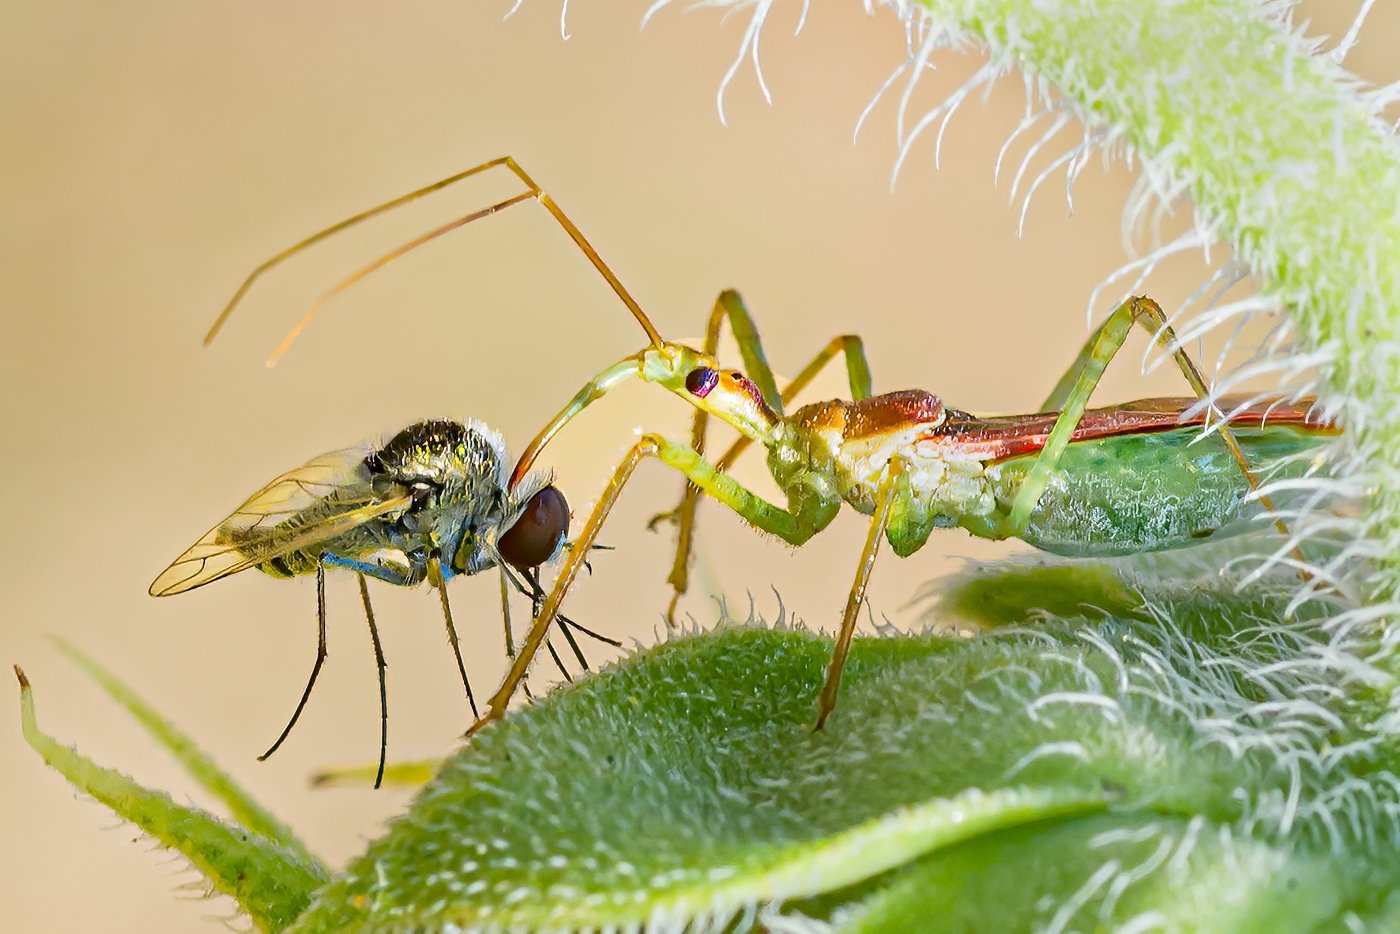 Assassin Bug with a Fly, Tom Savage, Cowtown Camera Club, 1 HM